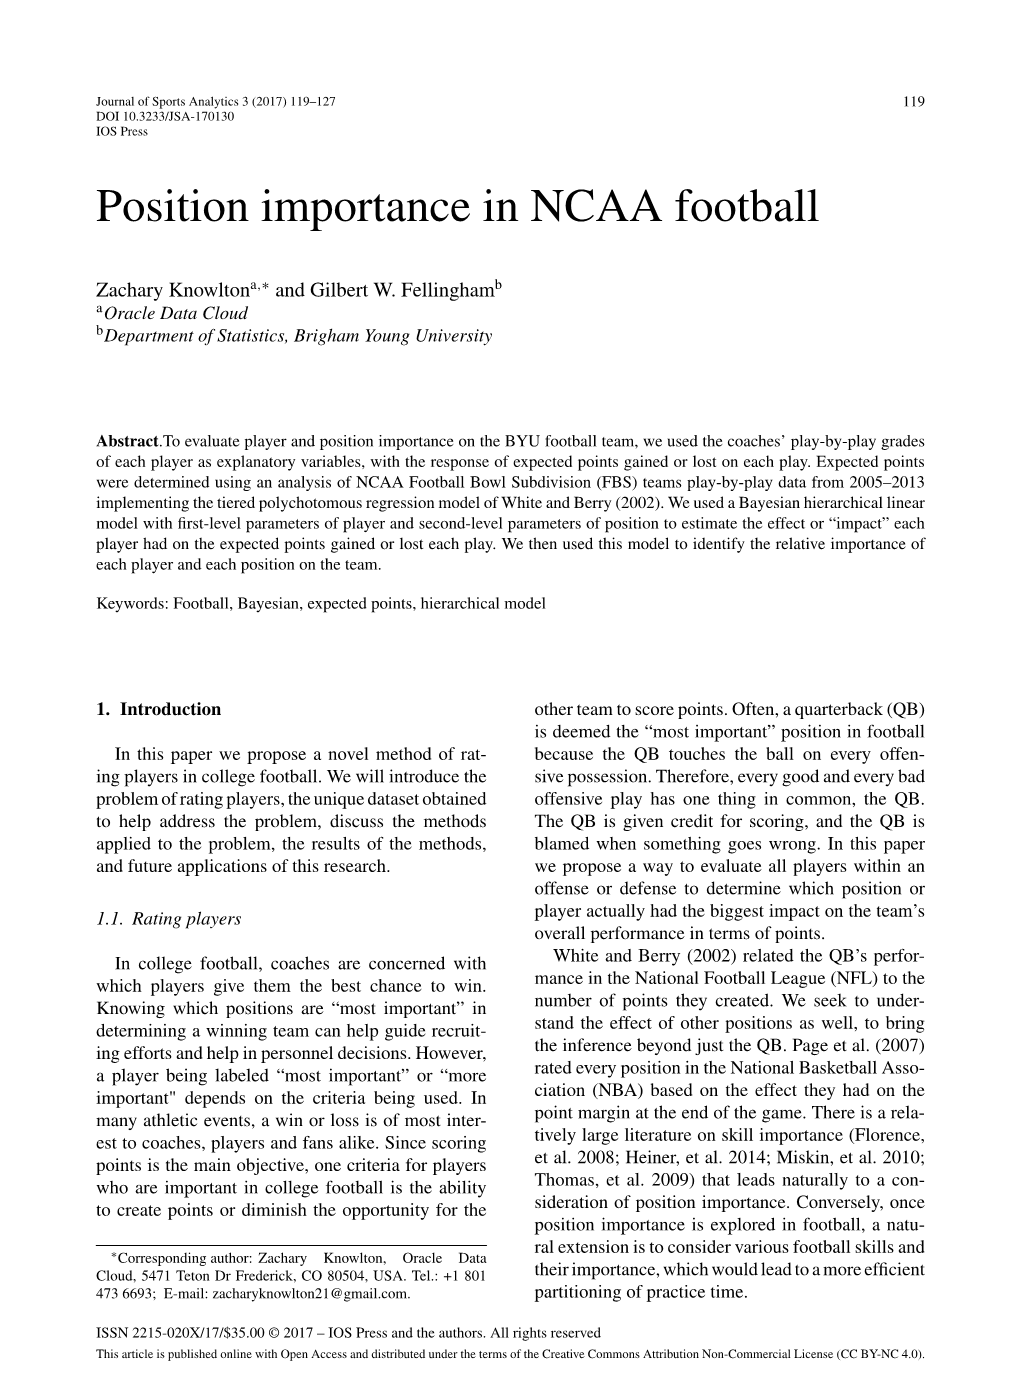 Position Importance in NCAA Football